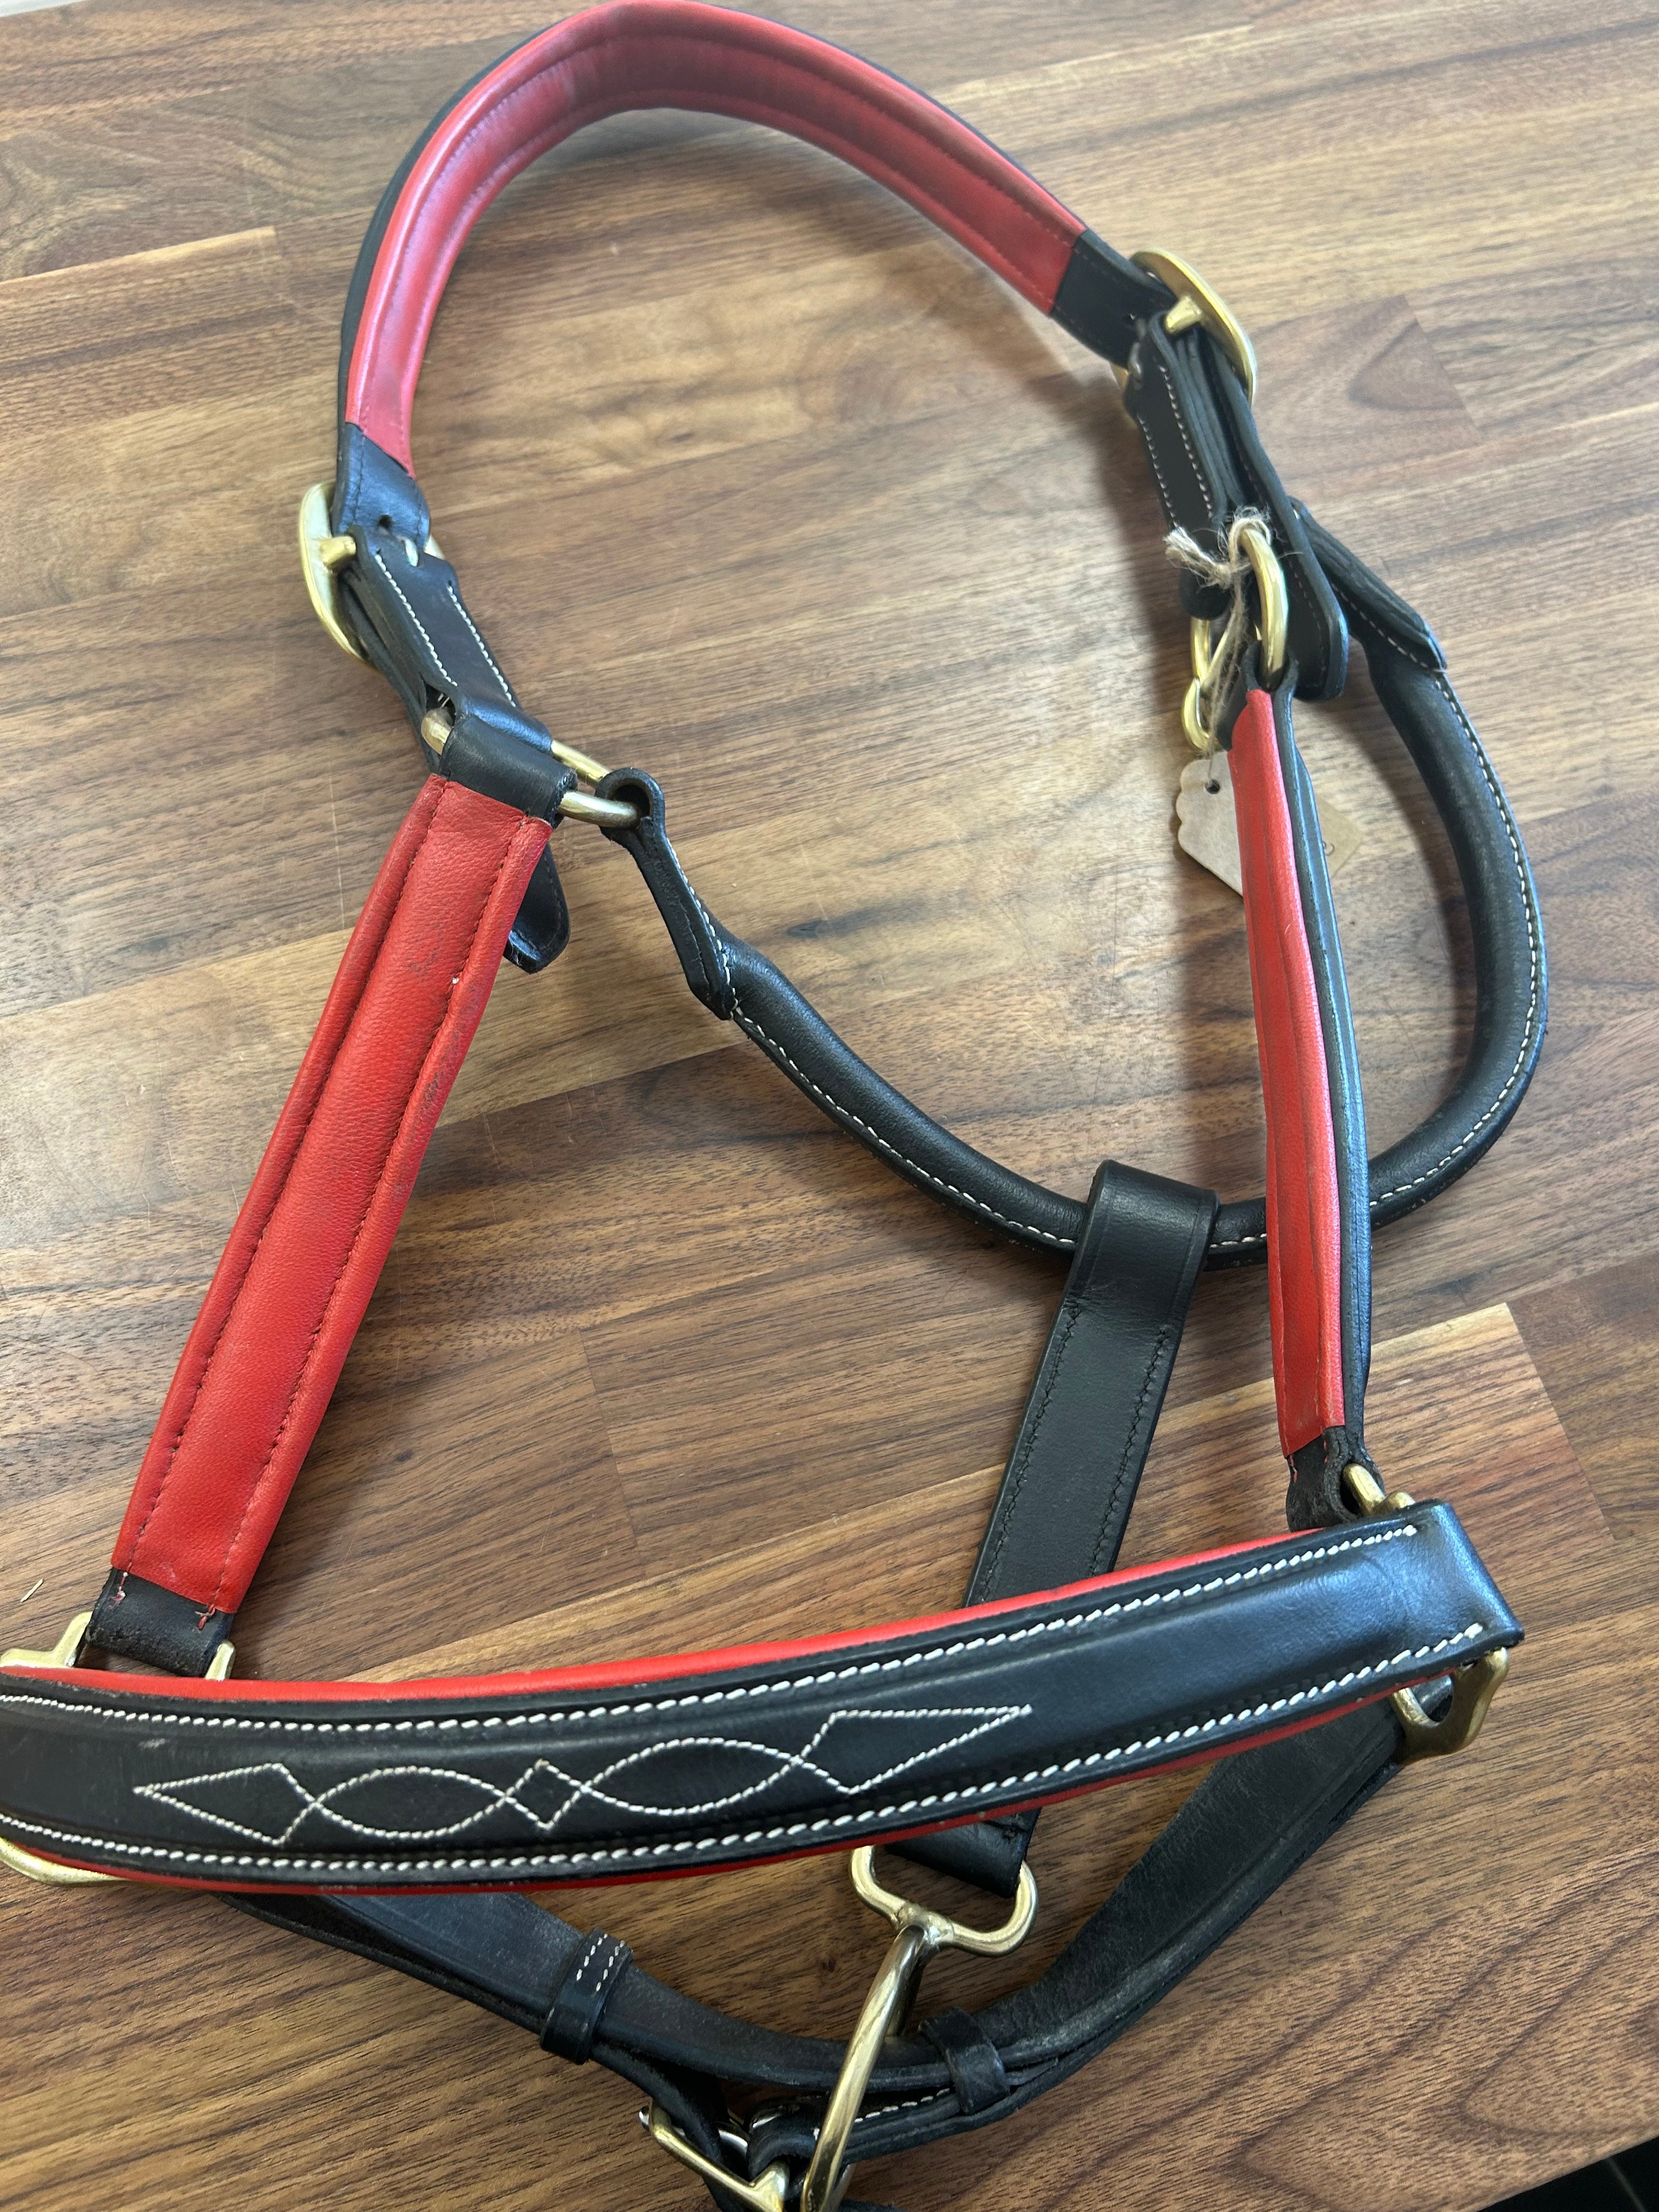 Fine Used Black With Red Padding Fancy Stitched Leather Halter - Full